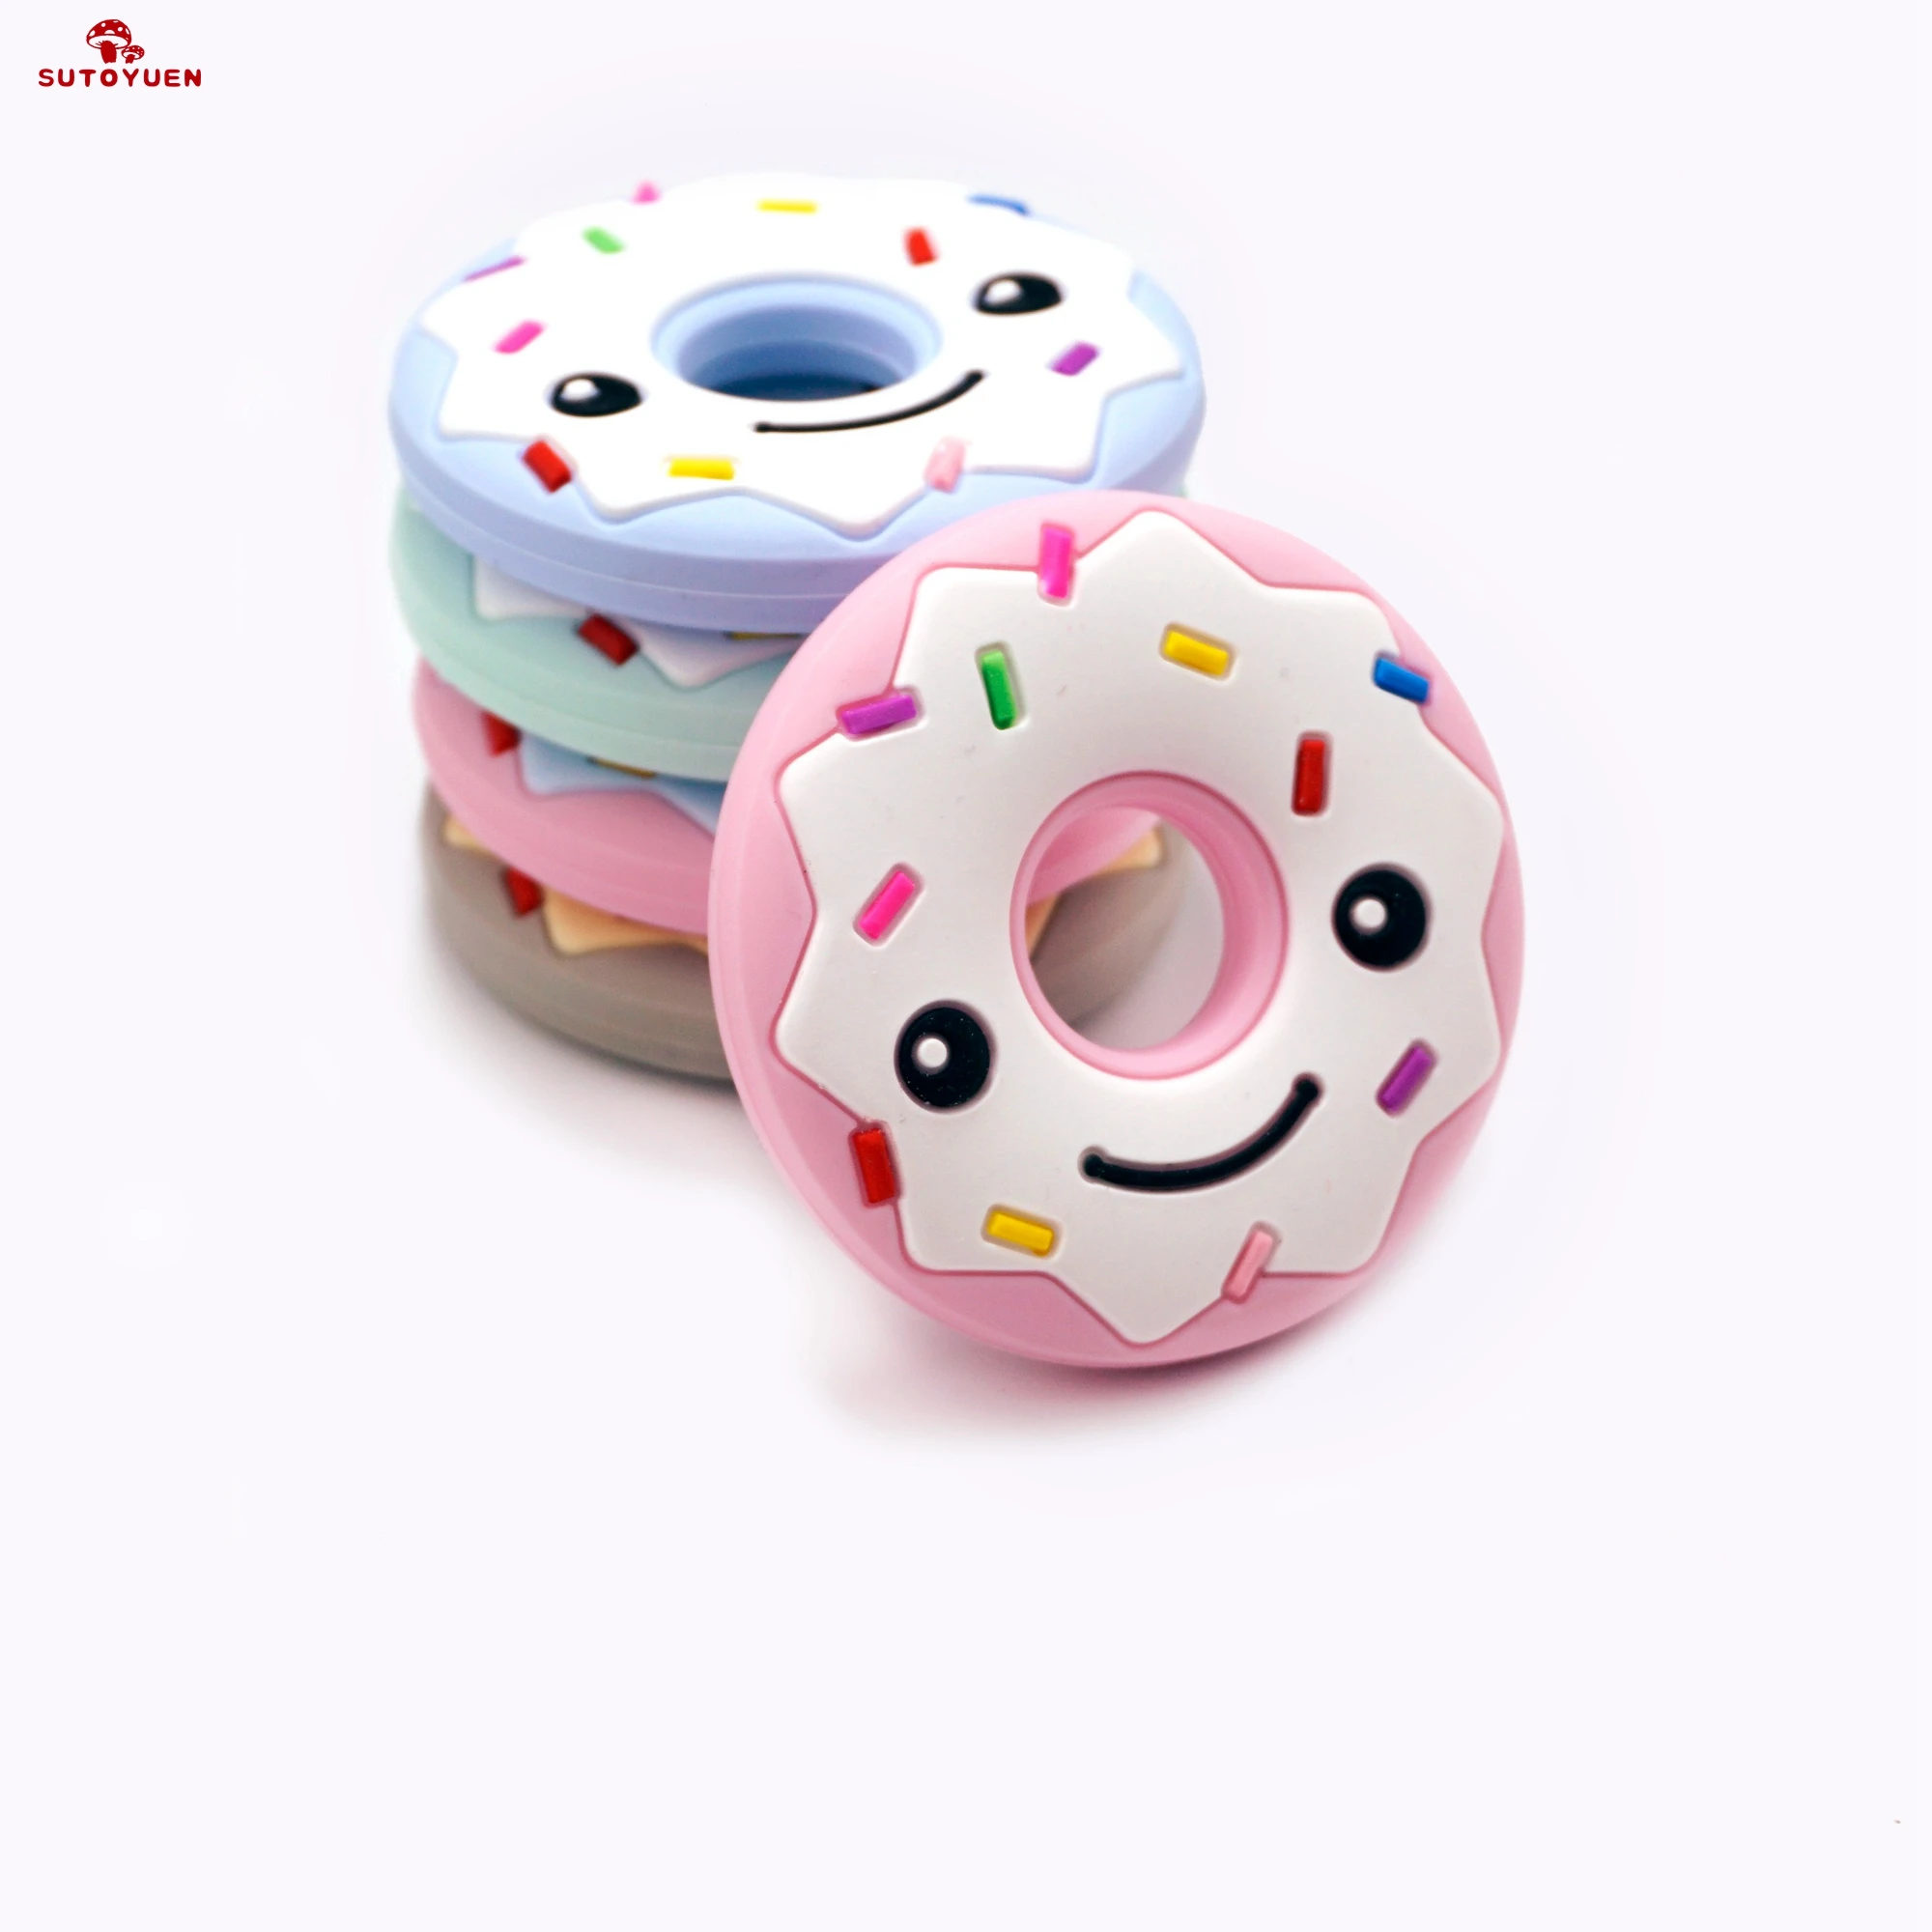 Sutoyuen 50pcs Baby Silicone Donut Teether BPA Free DIY Pendant Crafts Nursing Necklace Teething Chewable Toys Accessories